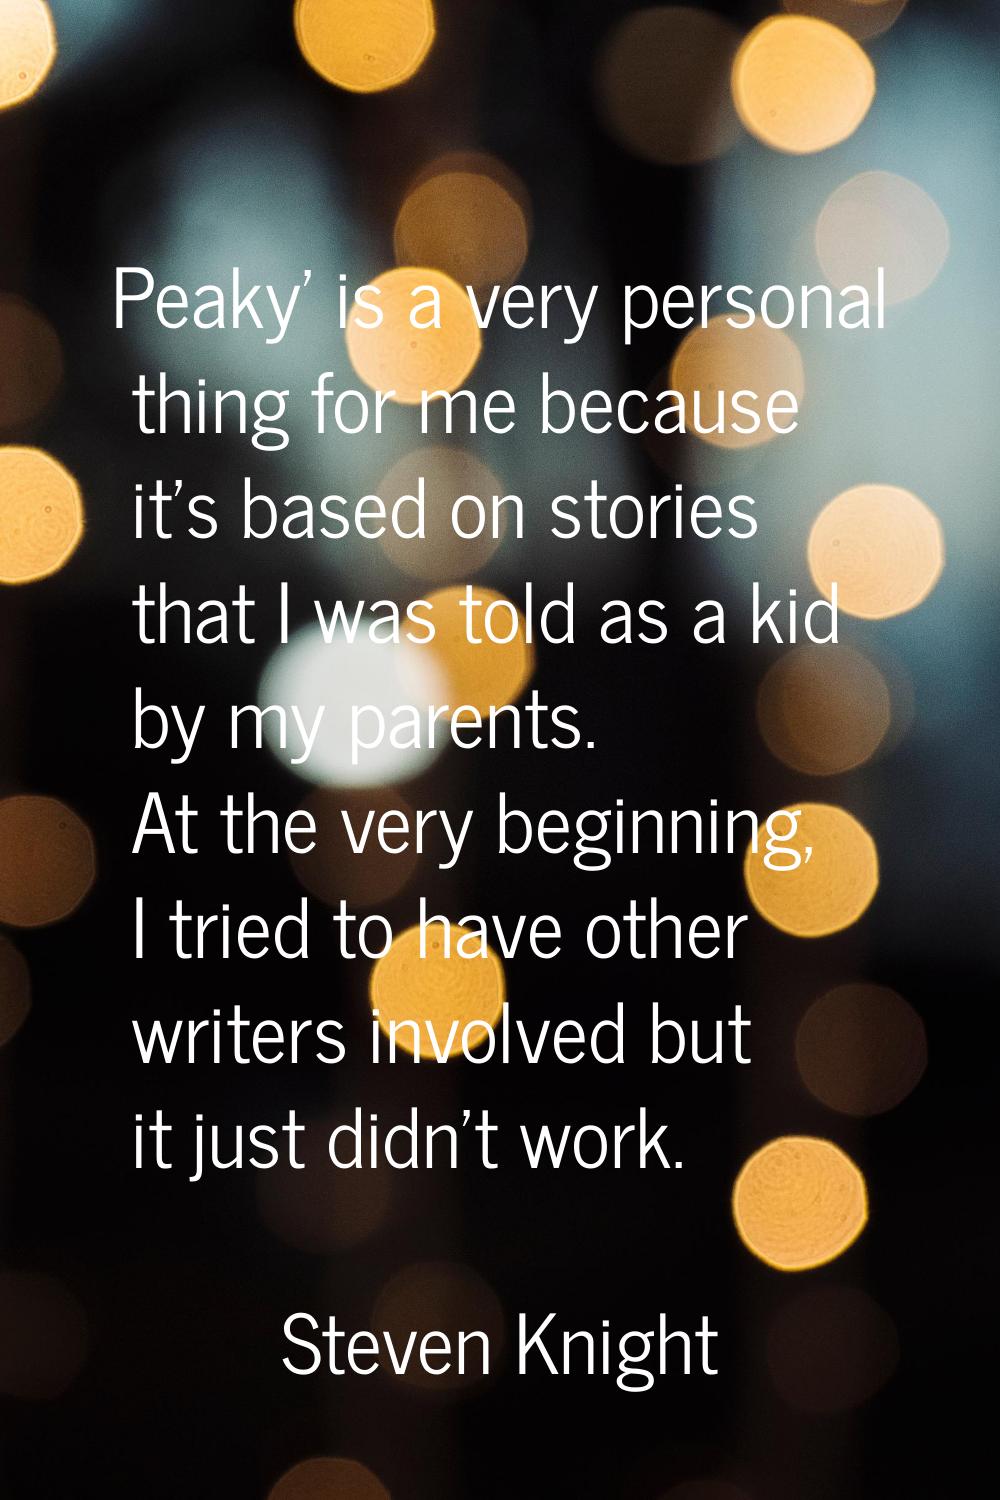 Peaky' is a very personal thing for me because it's based on stories that I was told as a kid by my